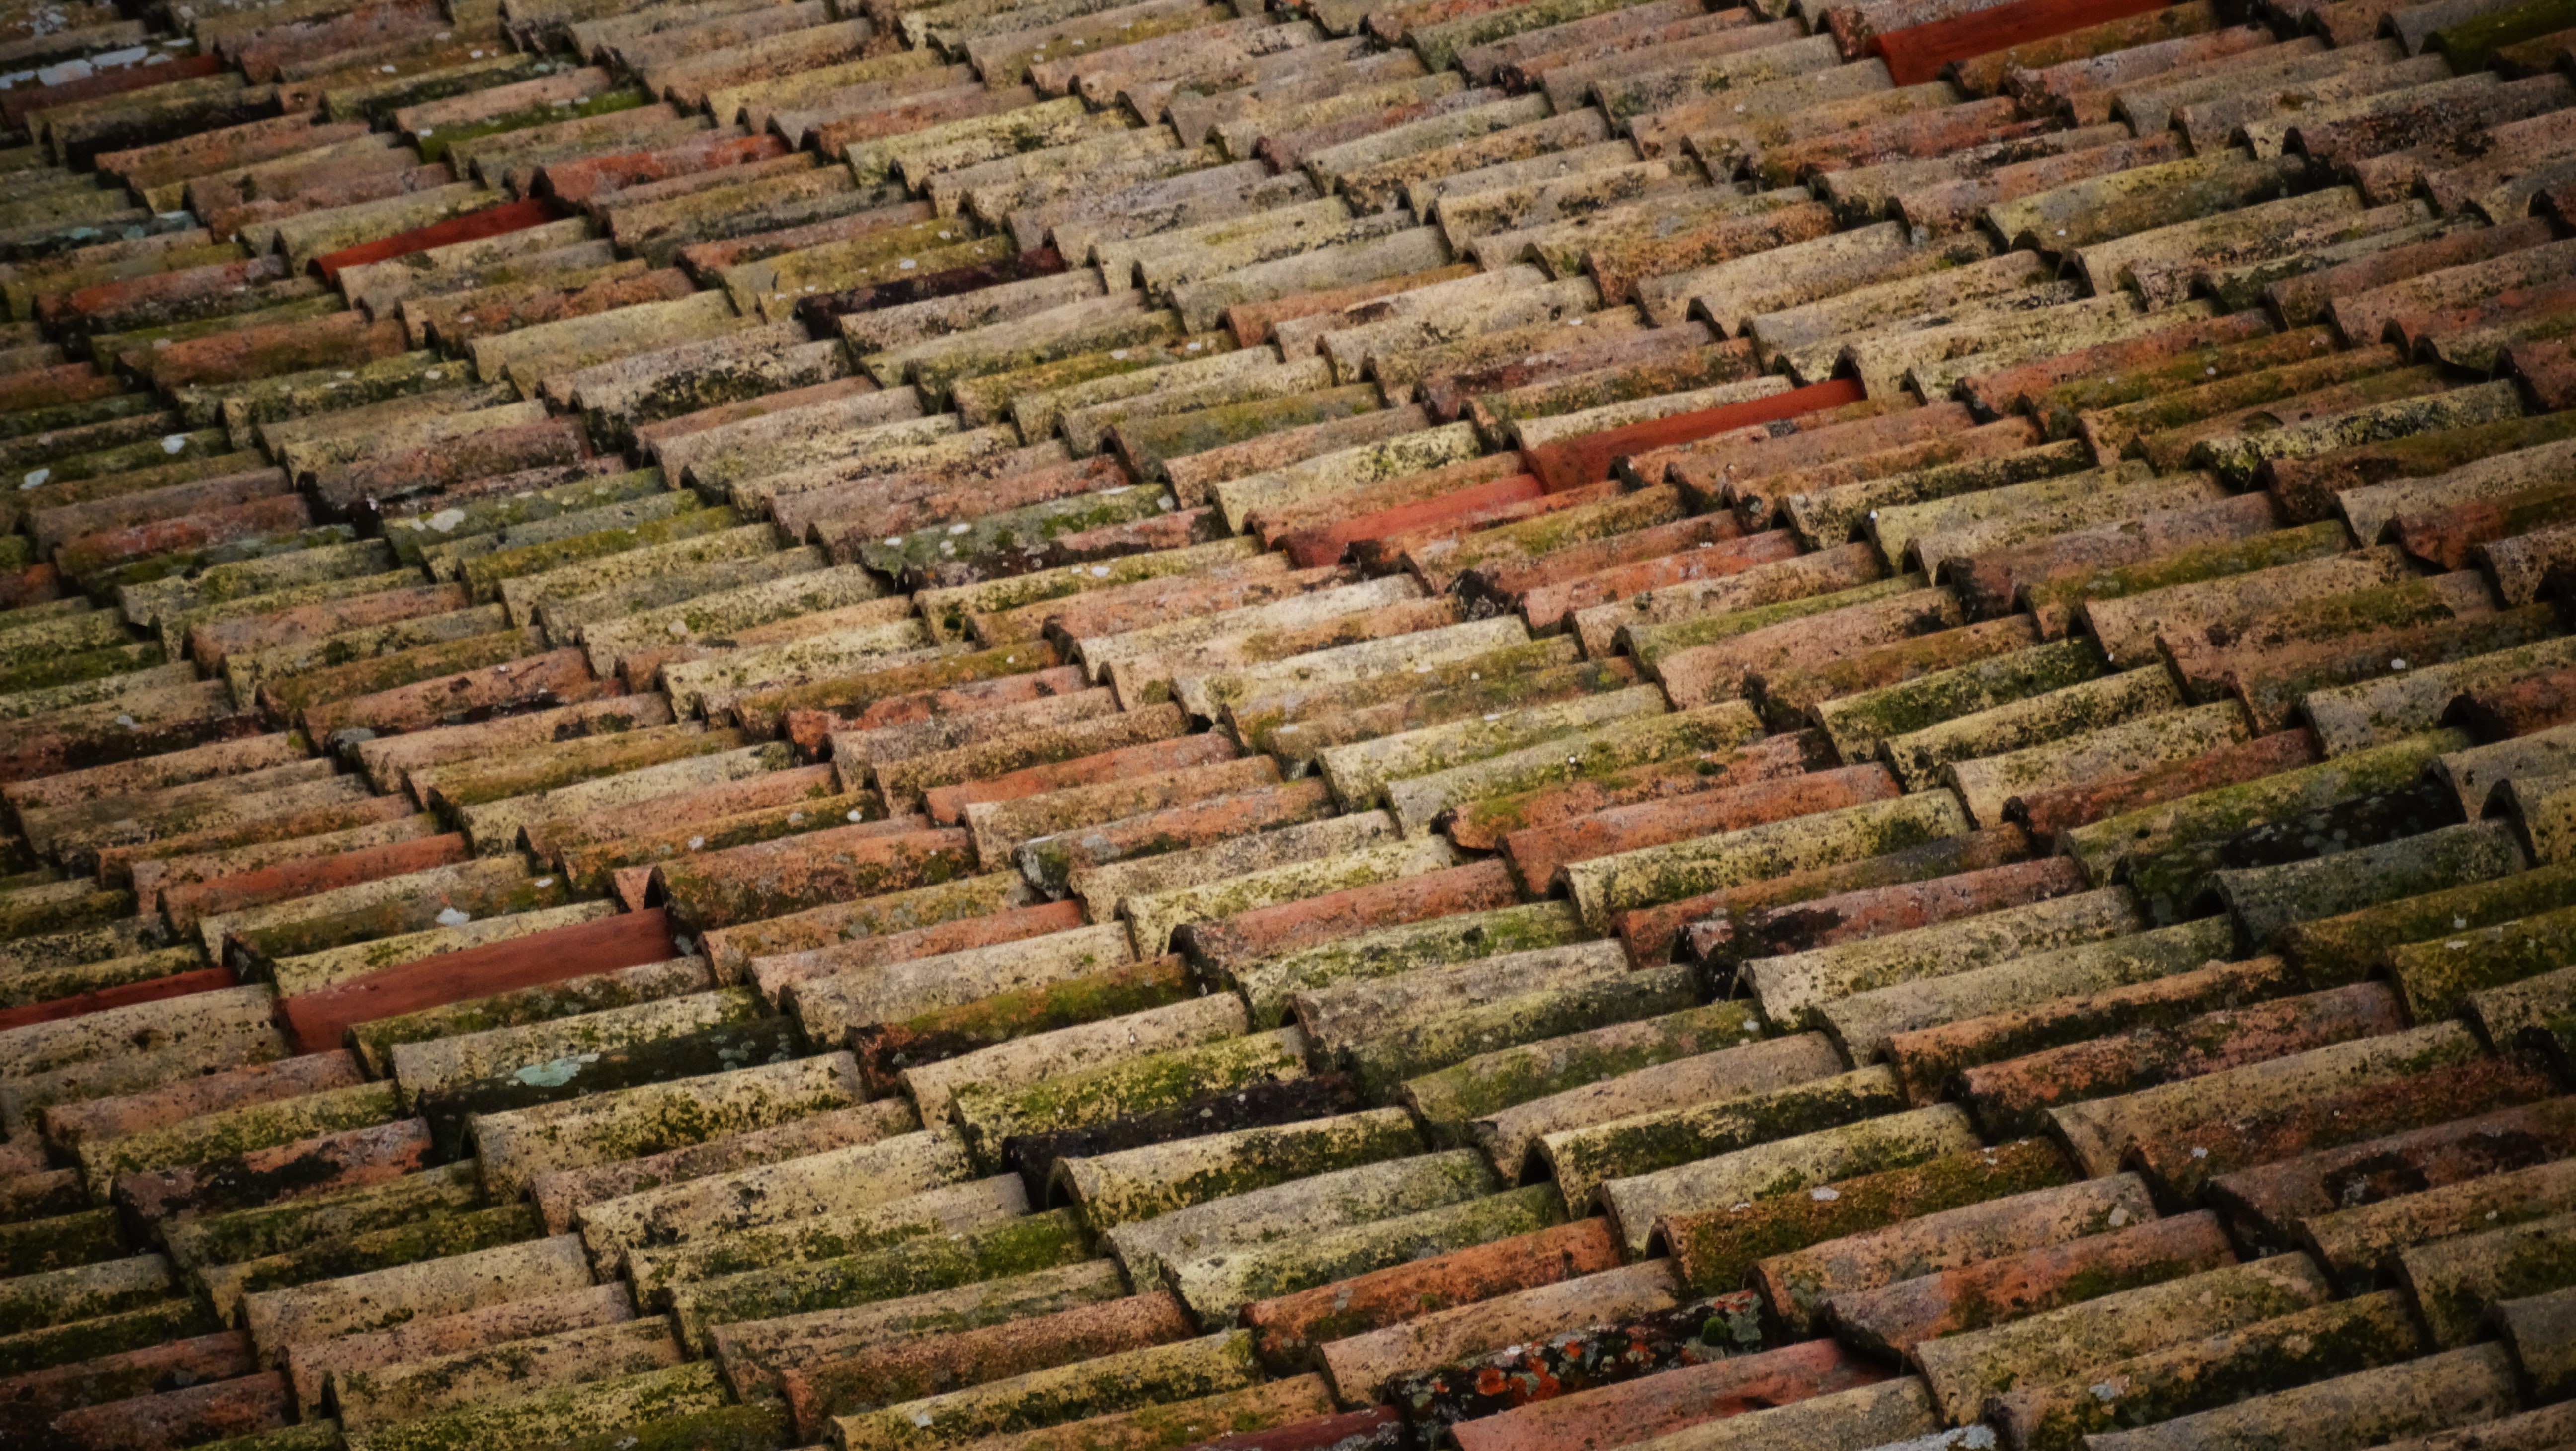 mossy roof tiles